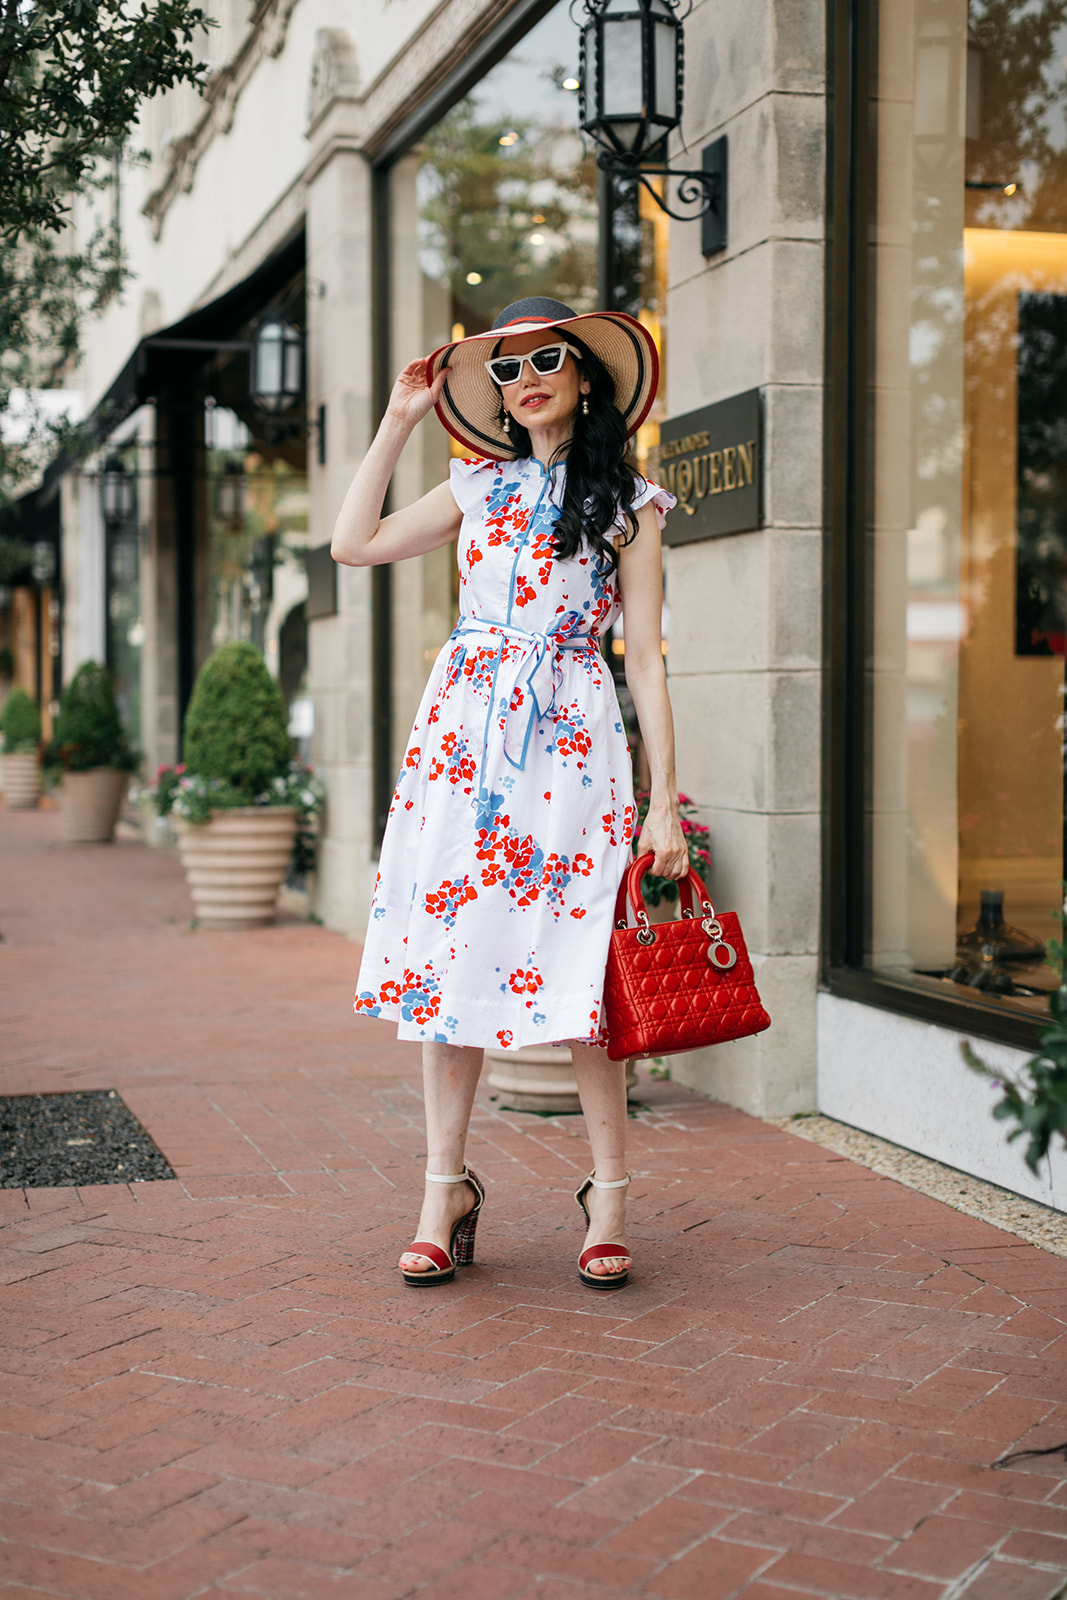 Brooks Brothers Shirt Dress, Tommy Hilfiger Sunhat and Sandals, Lady Dior Bag, Dallas Fashion Blogger |  Brooks Brothers Shirt Dress by popular Dallas fashion blog, Pretty Little Shoppers: image of a woman walking in  Highland Park Village and wearing a red, whites and blue Brooks Brothers shirt dress, white frame sunglasses, and wearing a red and black stripe straw hat while holding a red handbag. 